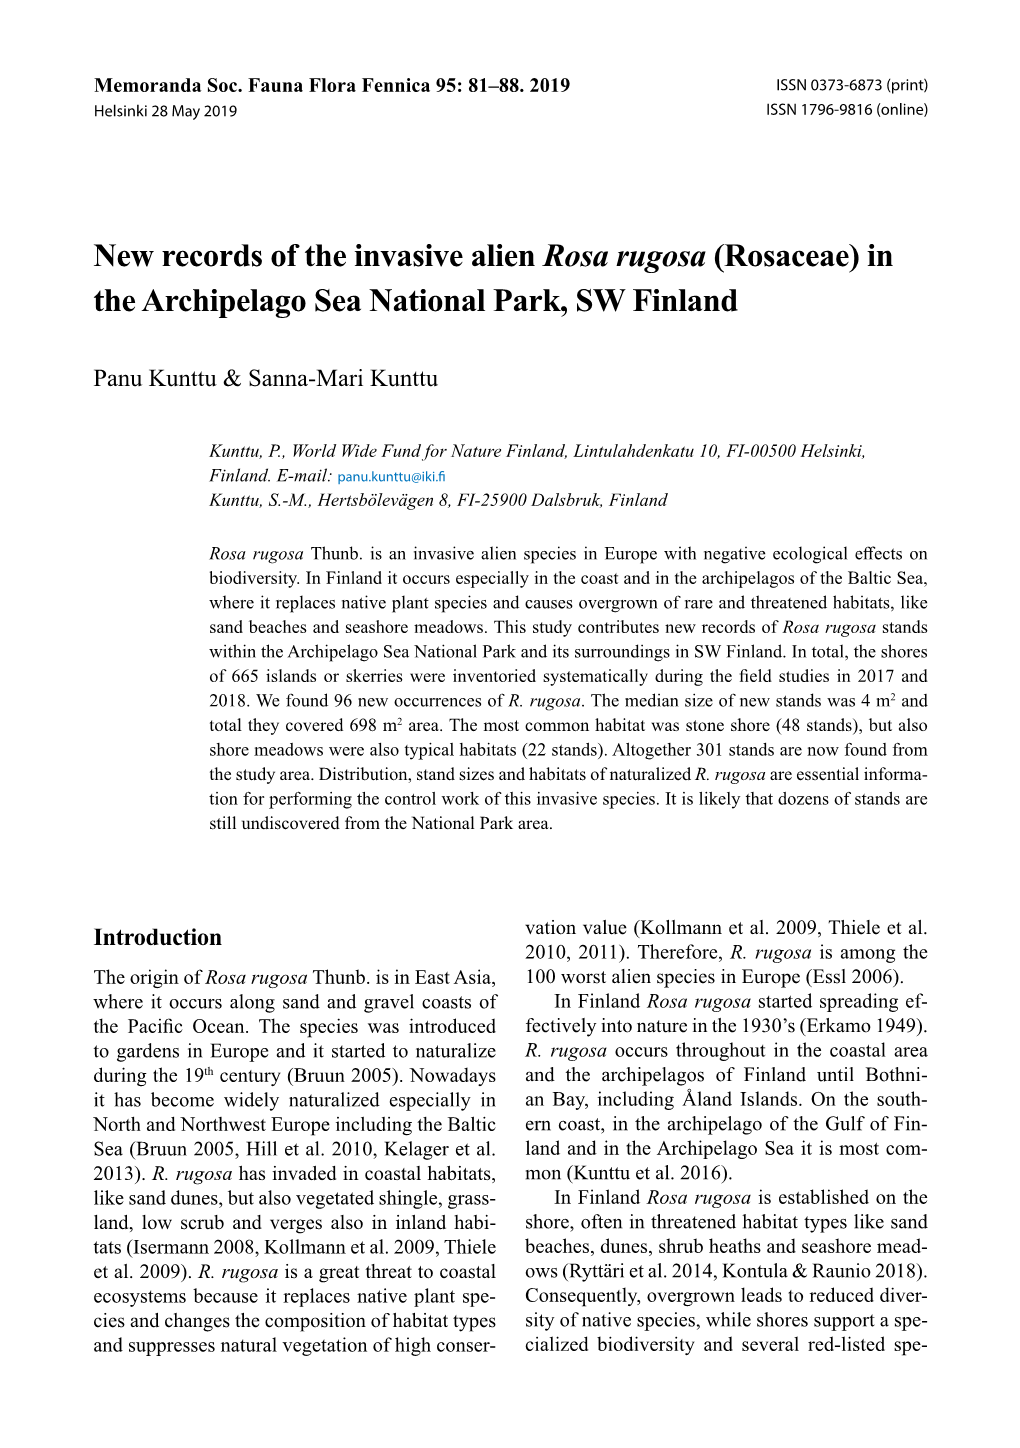 New Records of the Invasive Alien Rosa Rugosa (Rosaceae) in the Archipelago Sea National Park, SW Finland